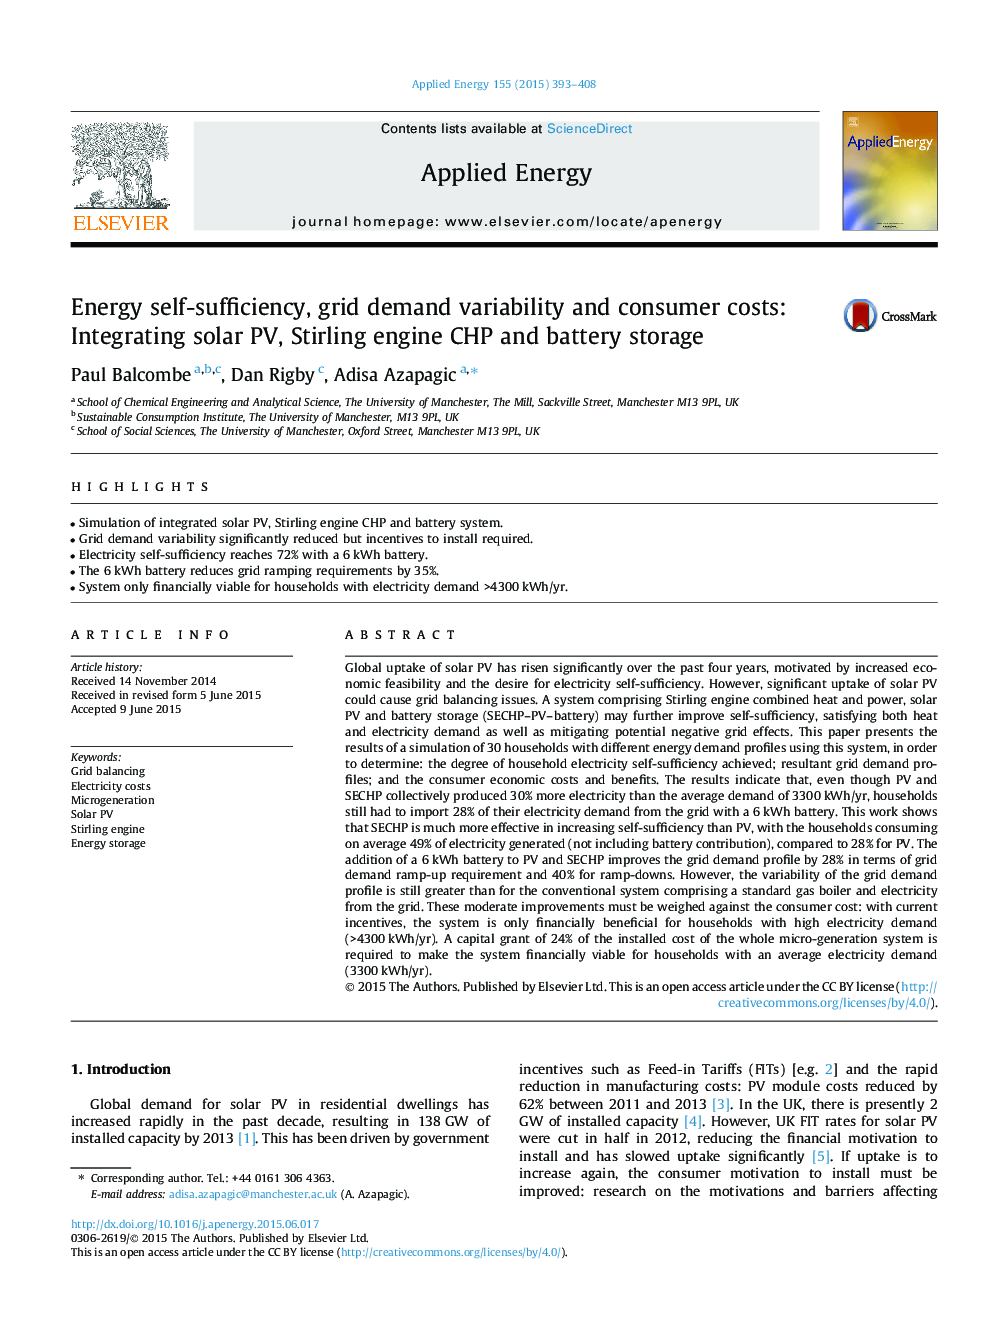 Energy self-sufficiency, grid demand variability and consumer costs: Integrating solar PV, Stirling engine CHP and battery storage